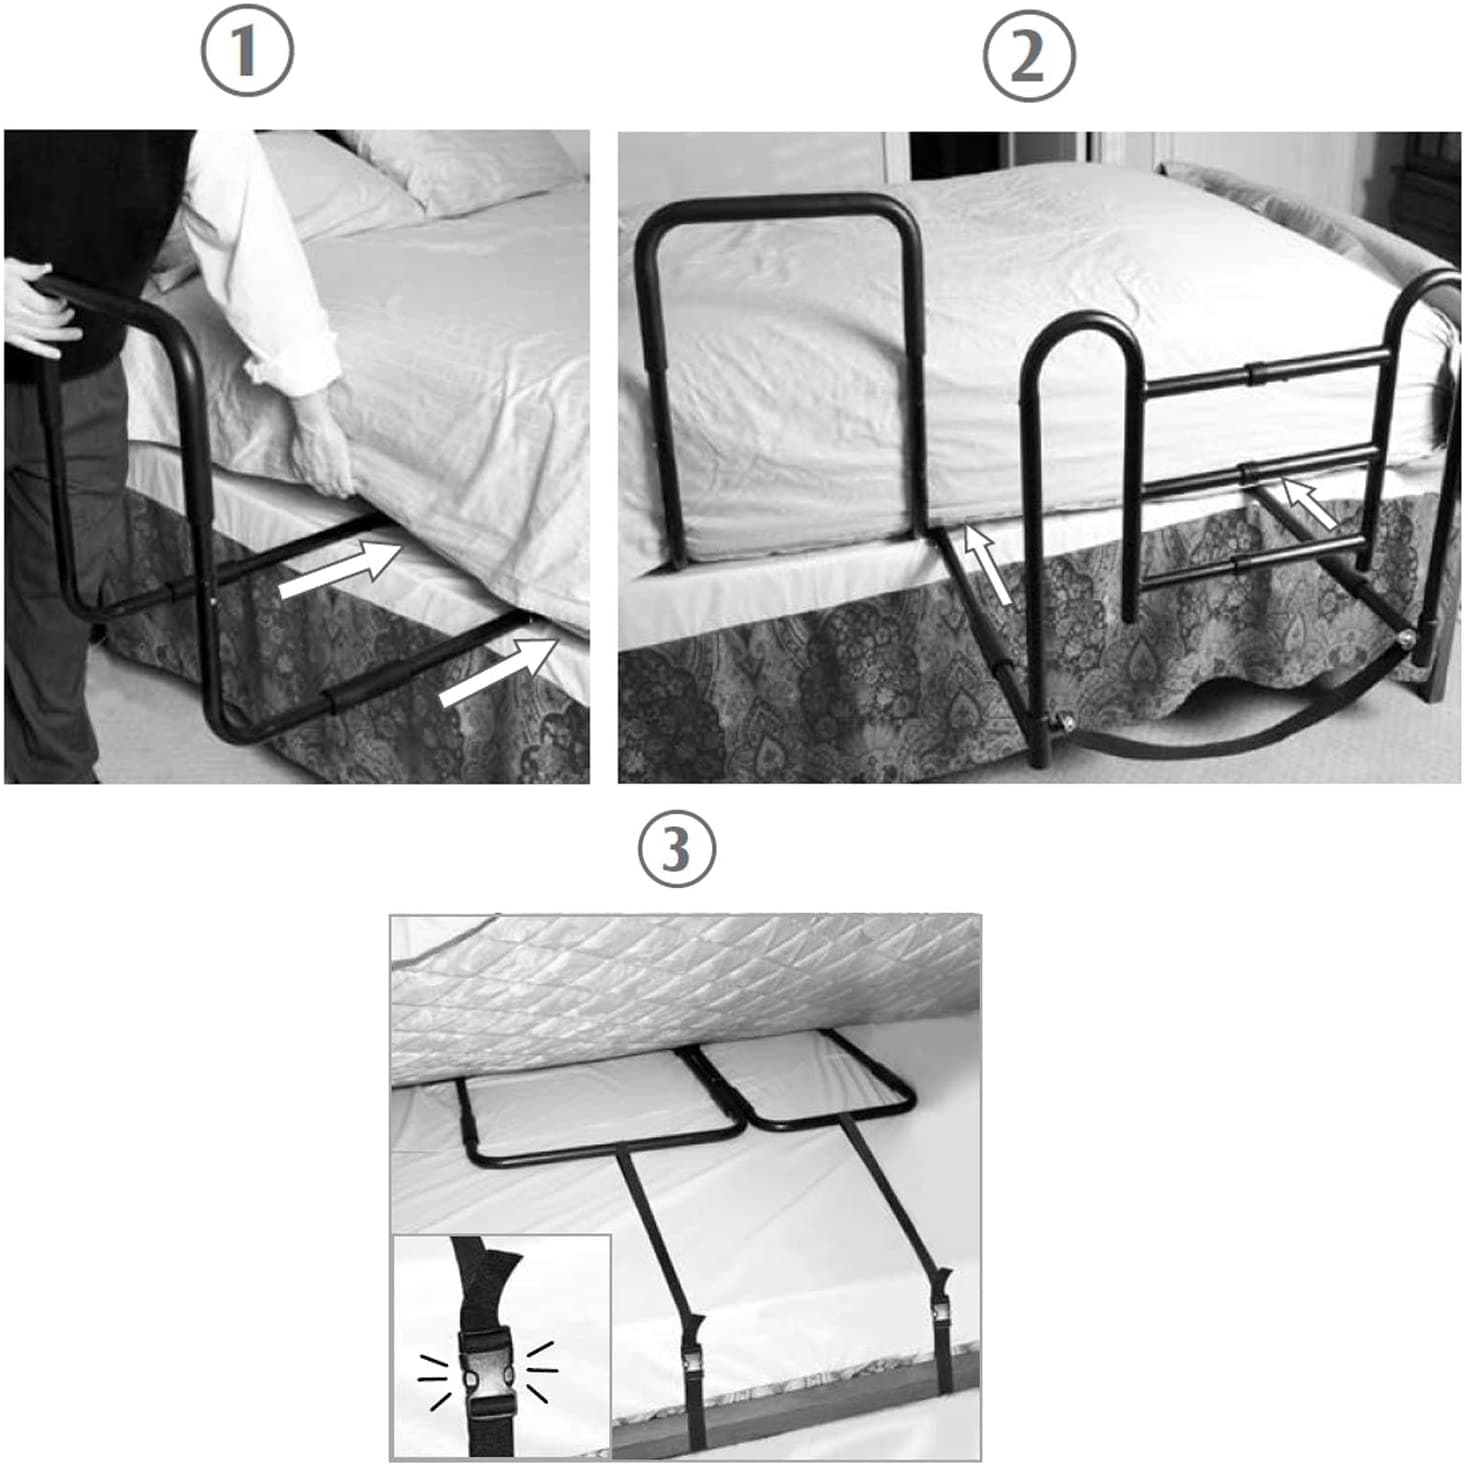 Carex Easy-Up Bed Safety Rails  - Combination Fall Prevention Safety Rails - Senior.com Bed Rails